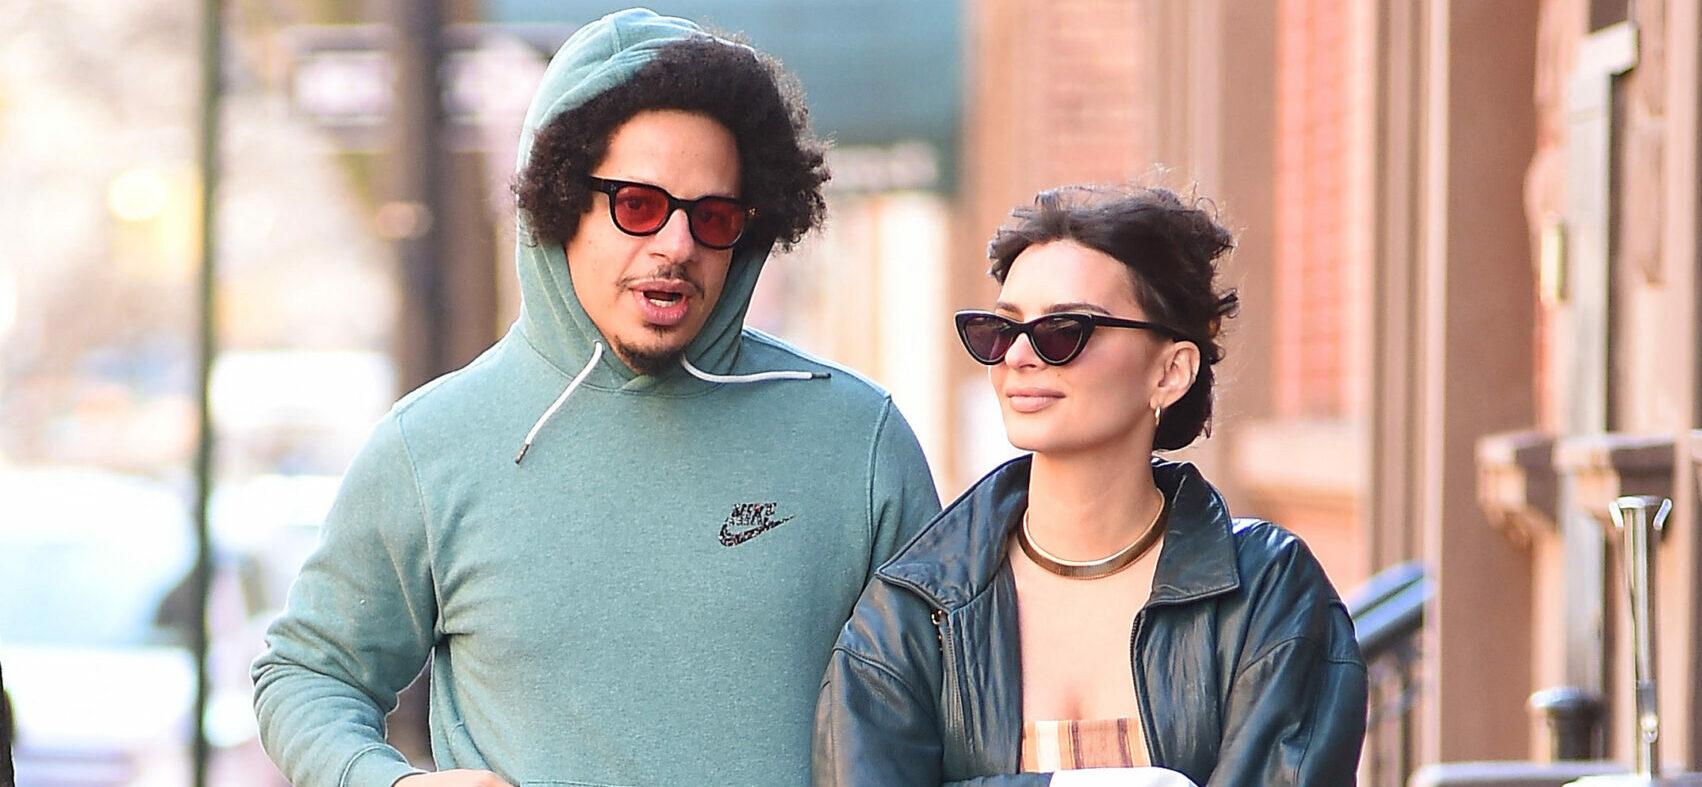 Emily Ratajkowski and rumored boyfriend Eric Andre get lunch at the Via Carota in West Village